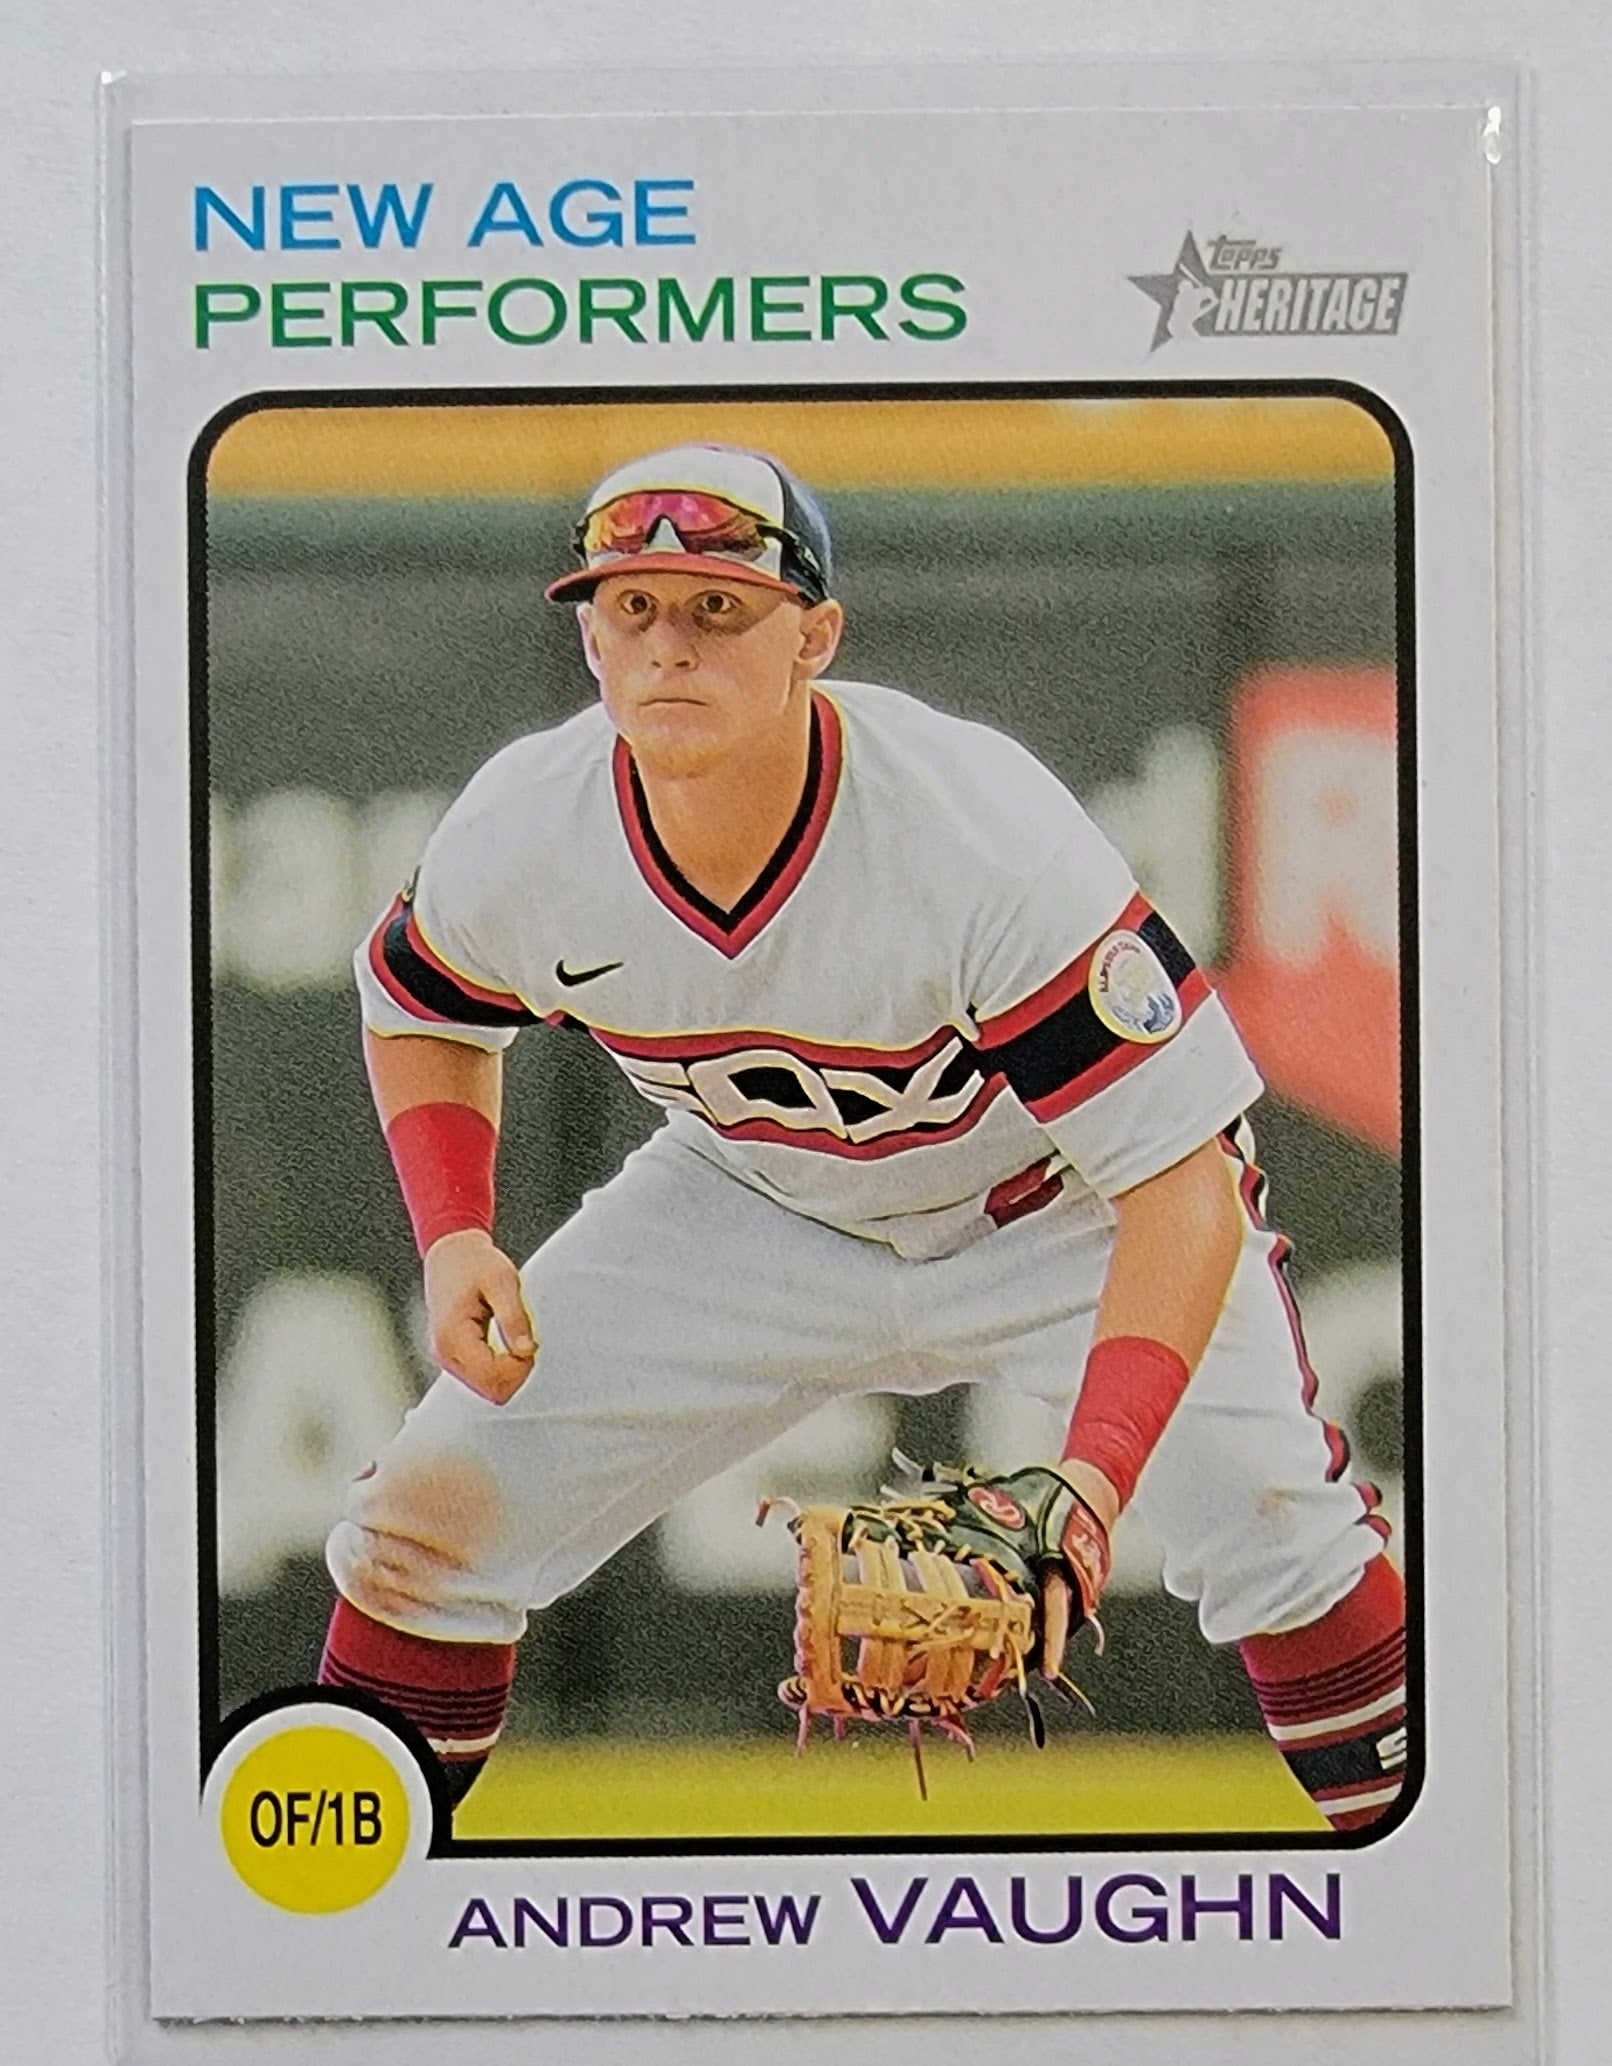 2022 Topps Heritage Andrew Vaugn New Age Performers Retro Jersey Baseball  Card AVM1